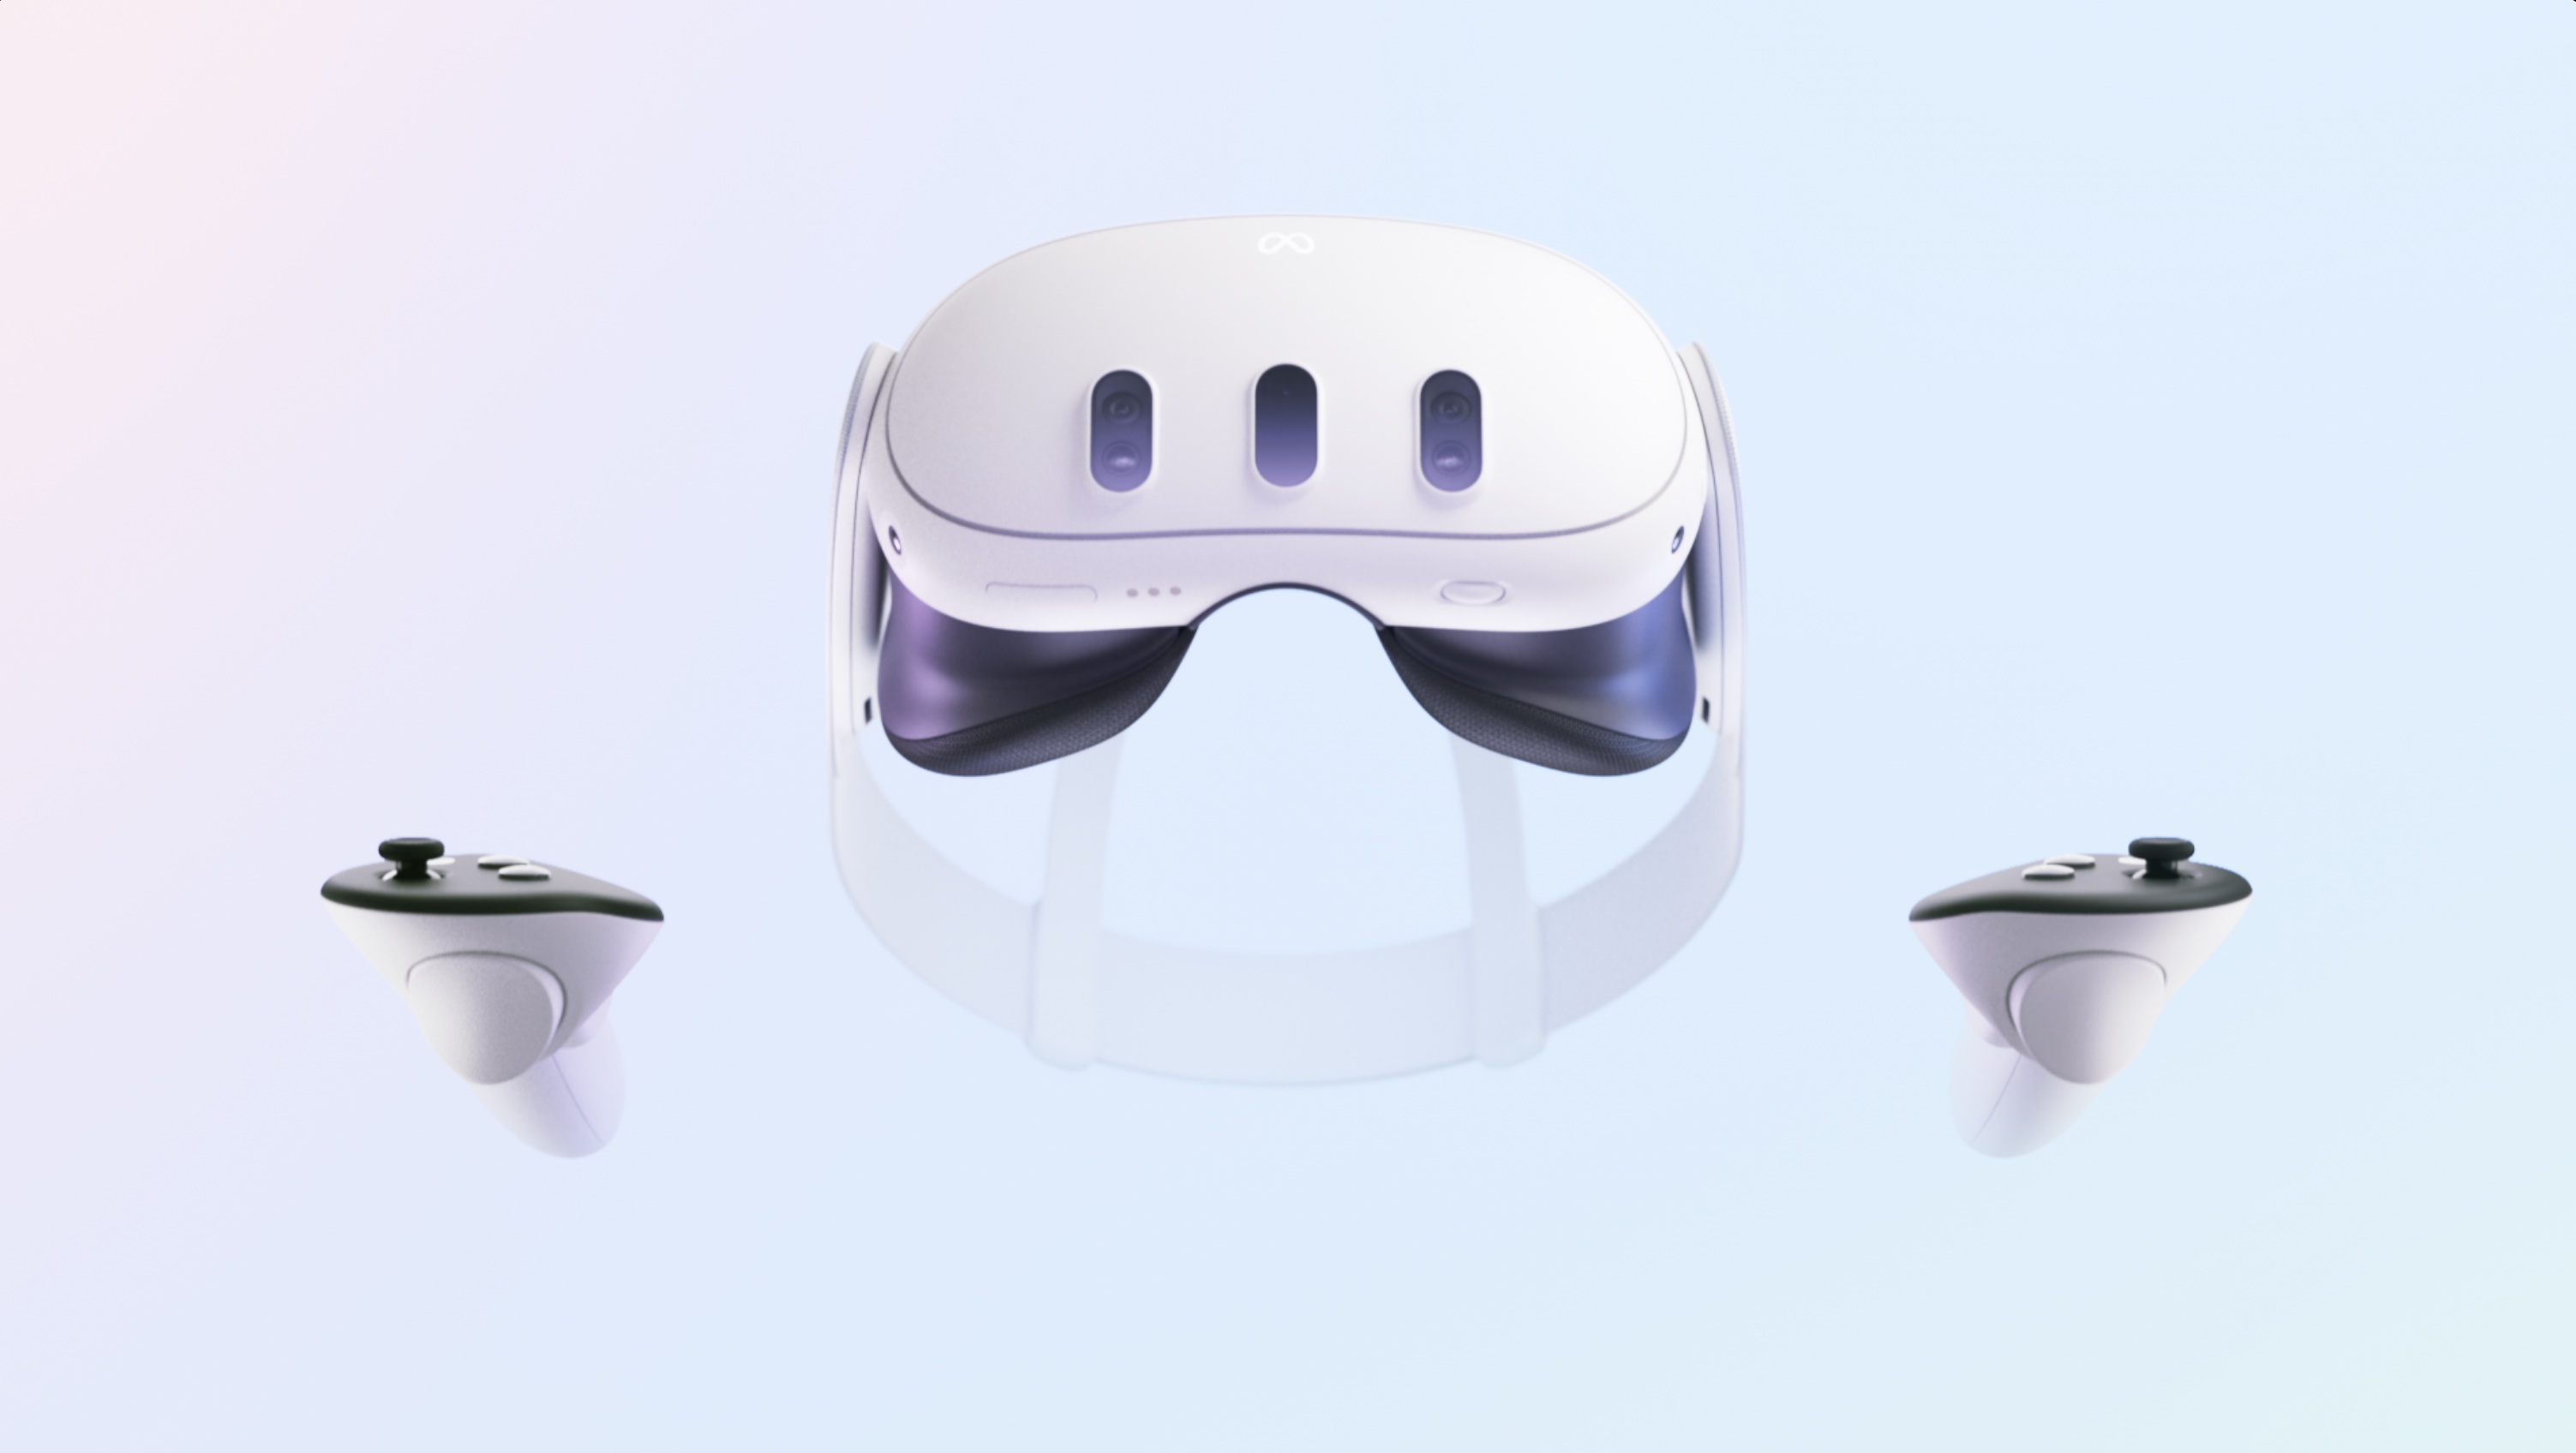 The Oculus Quest 3 and its controllers, front on, on a baby blue background